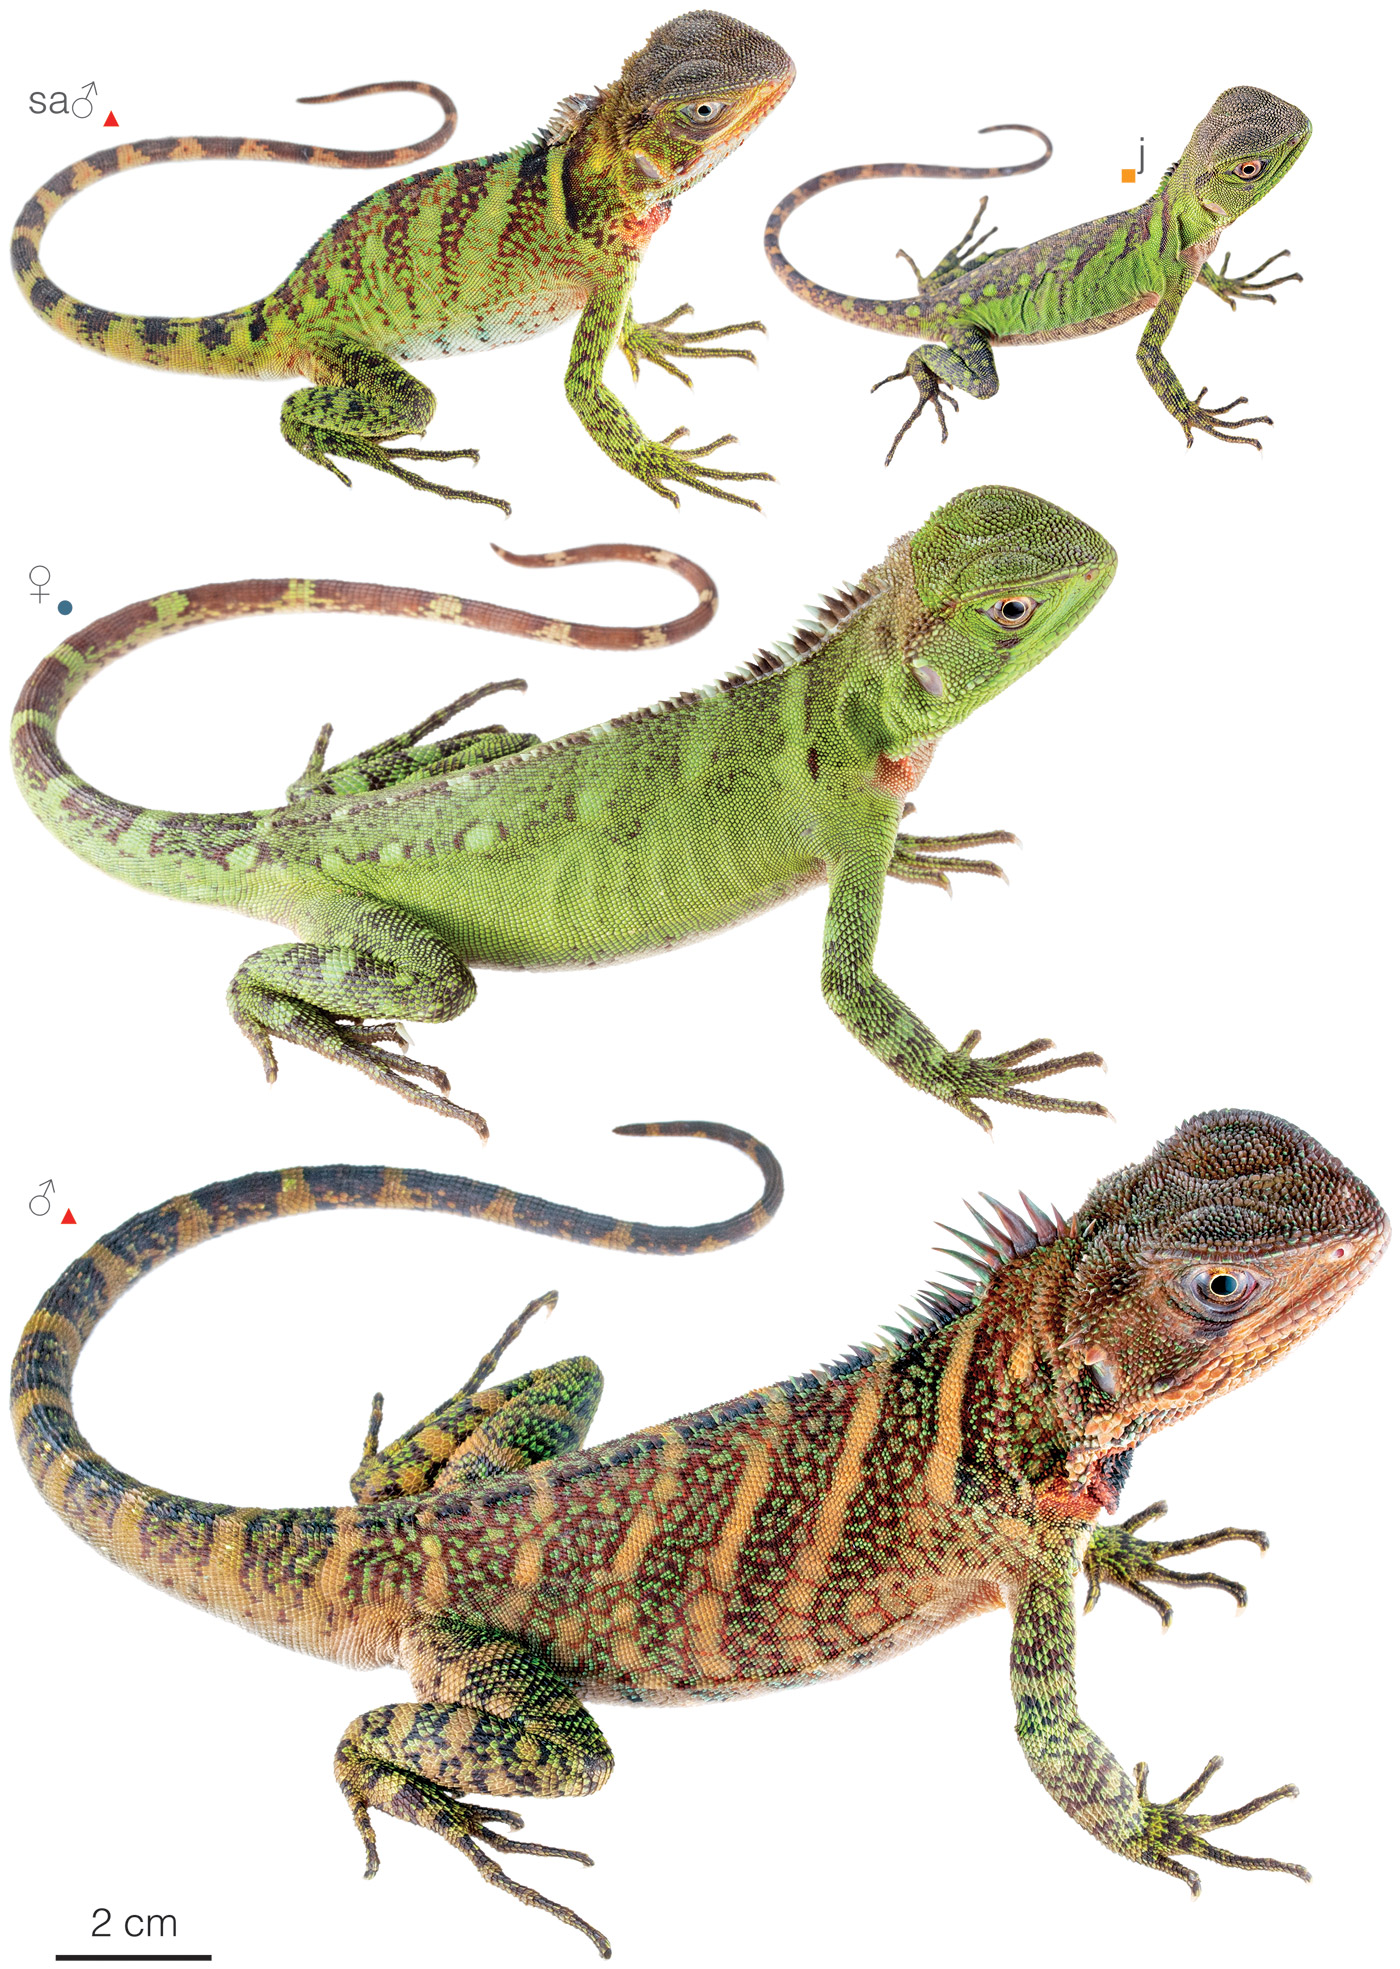 Figure showing variation among individuals of Enyalioides laticeps